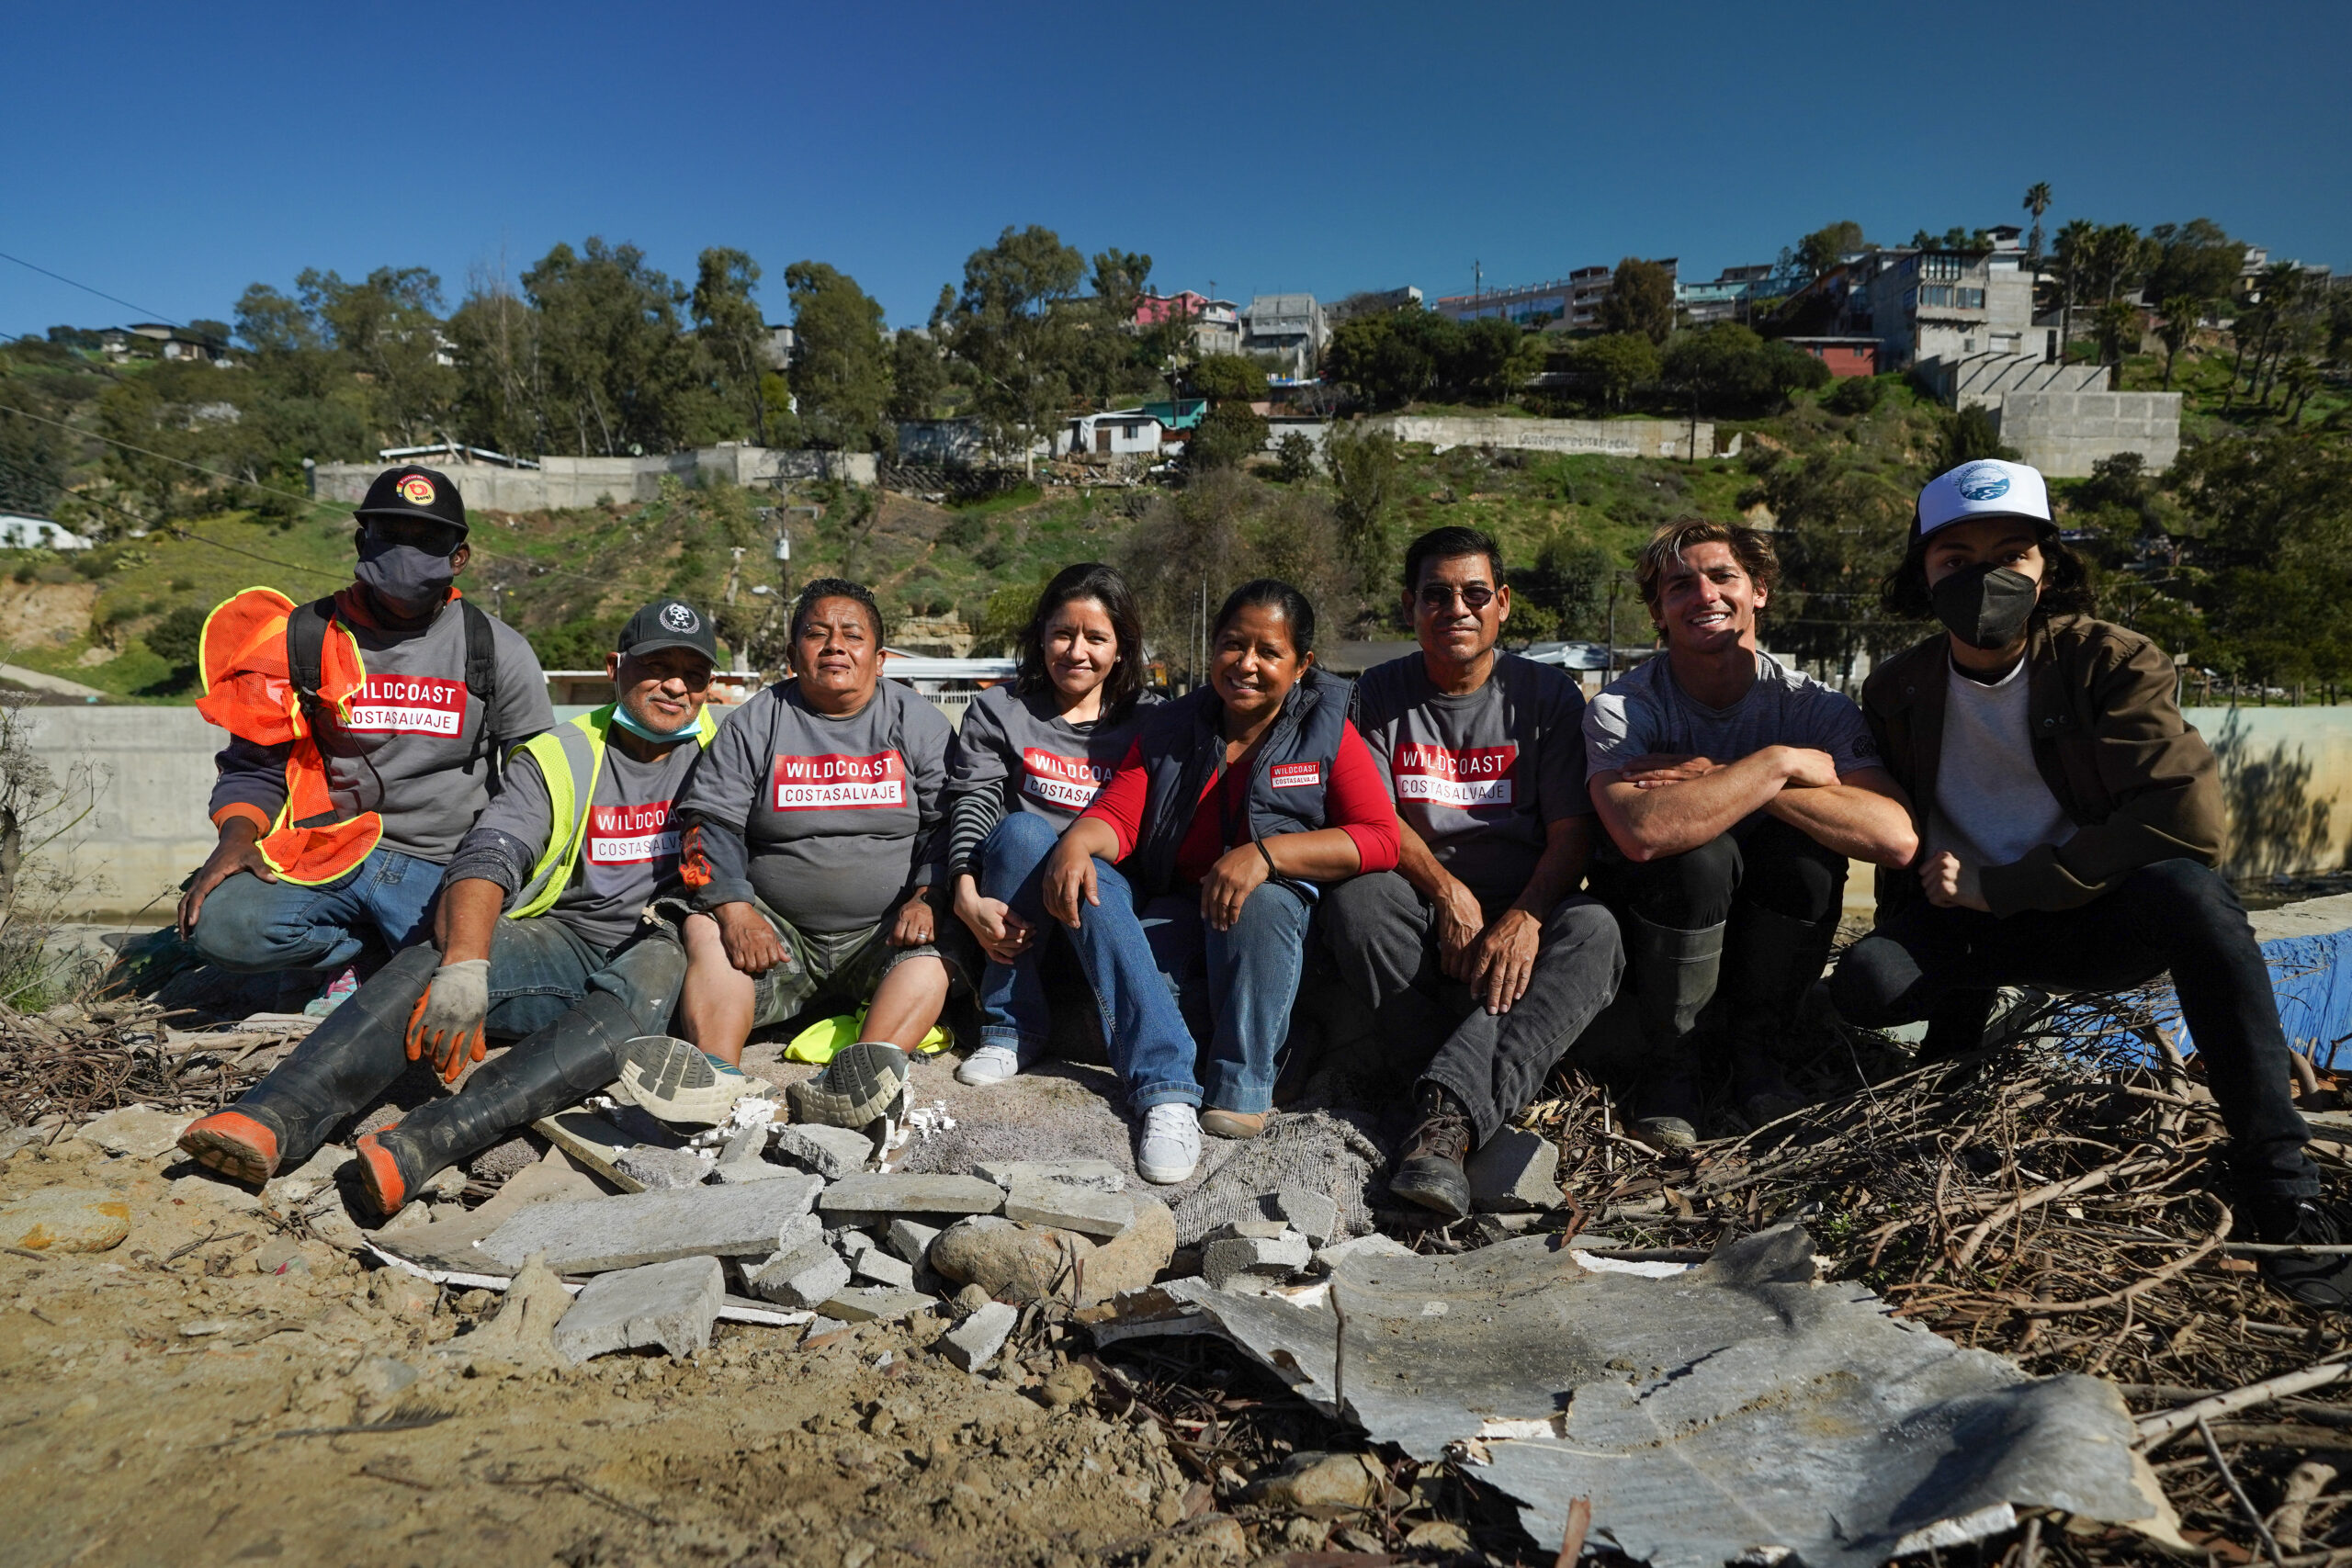 8 members of the WILDCOAST team sitting together and smiling at the camera onsite in Los Laureles Canyon.